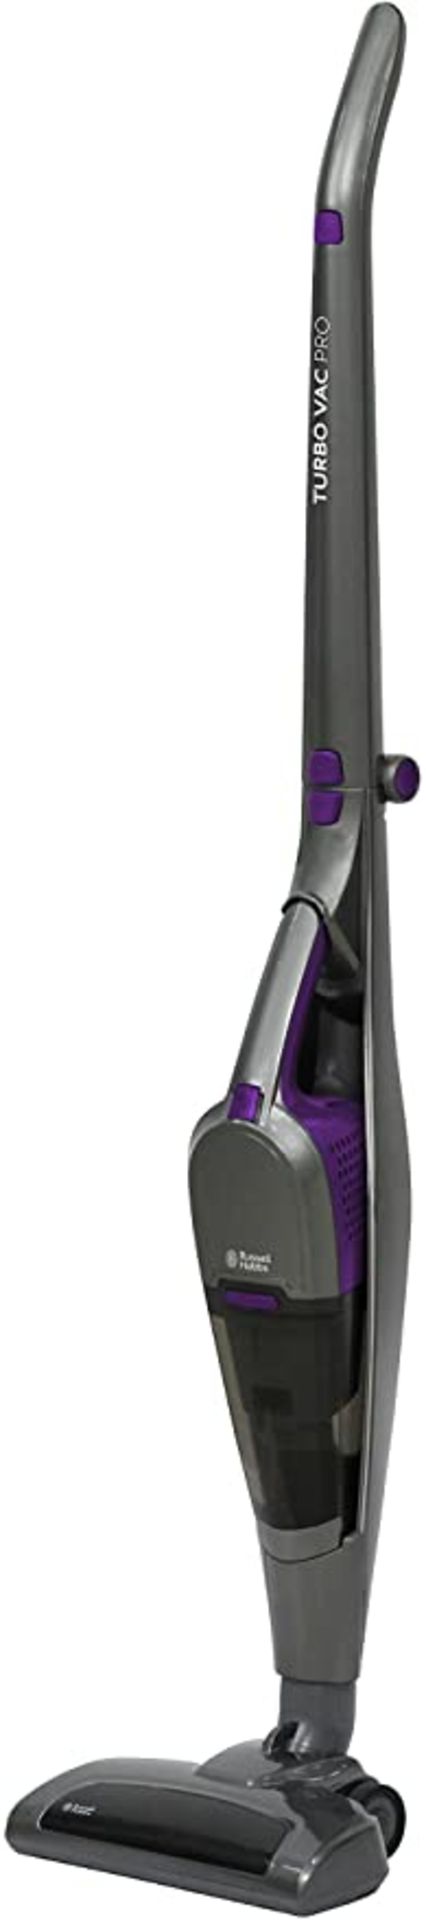 UNBOXED RUSSELL HOBBS TURBO VAC PRO HANDHELD CORDLESS VACUUM CLEANER RRP £79.99Condition